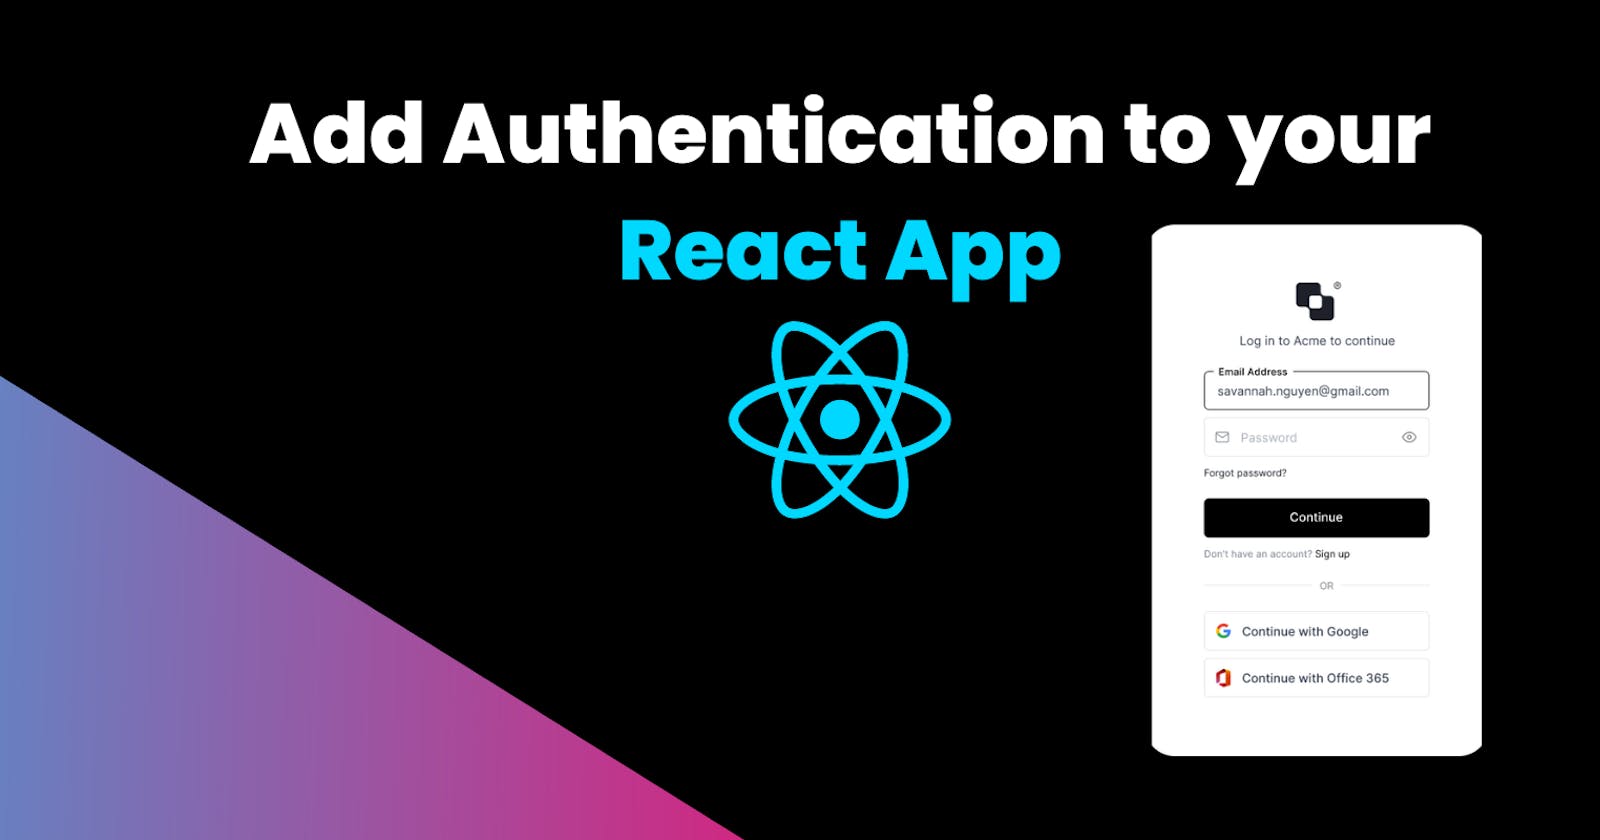 Add Authentication to your React App in just 5 min.